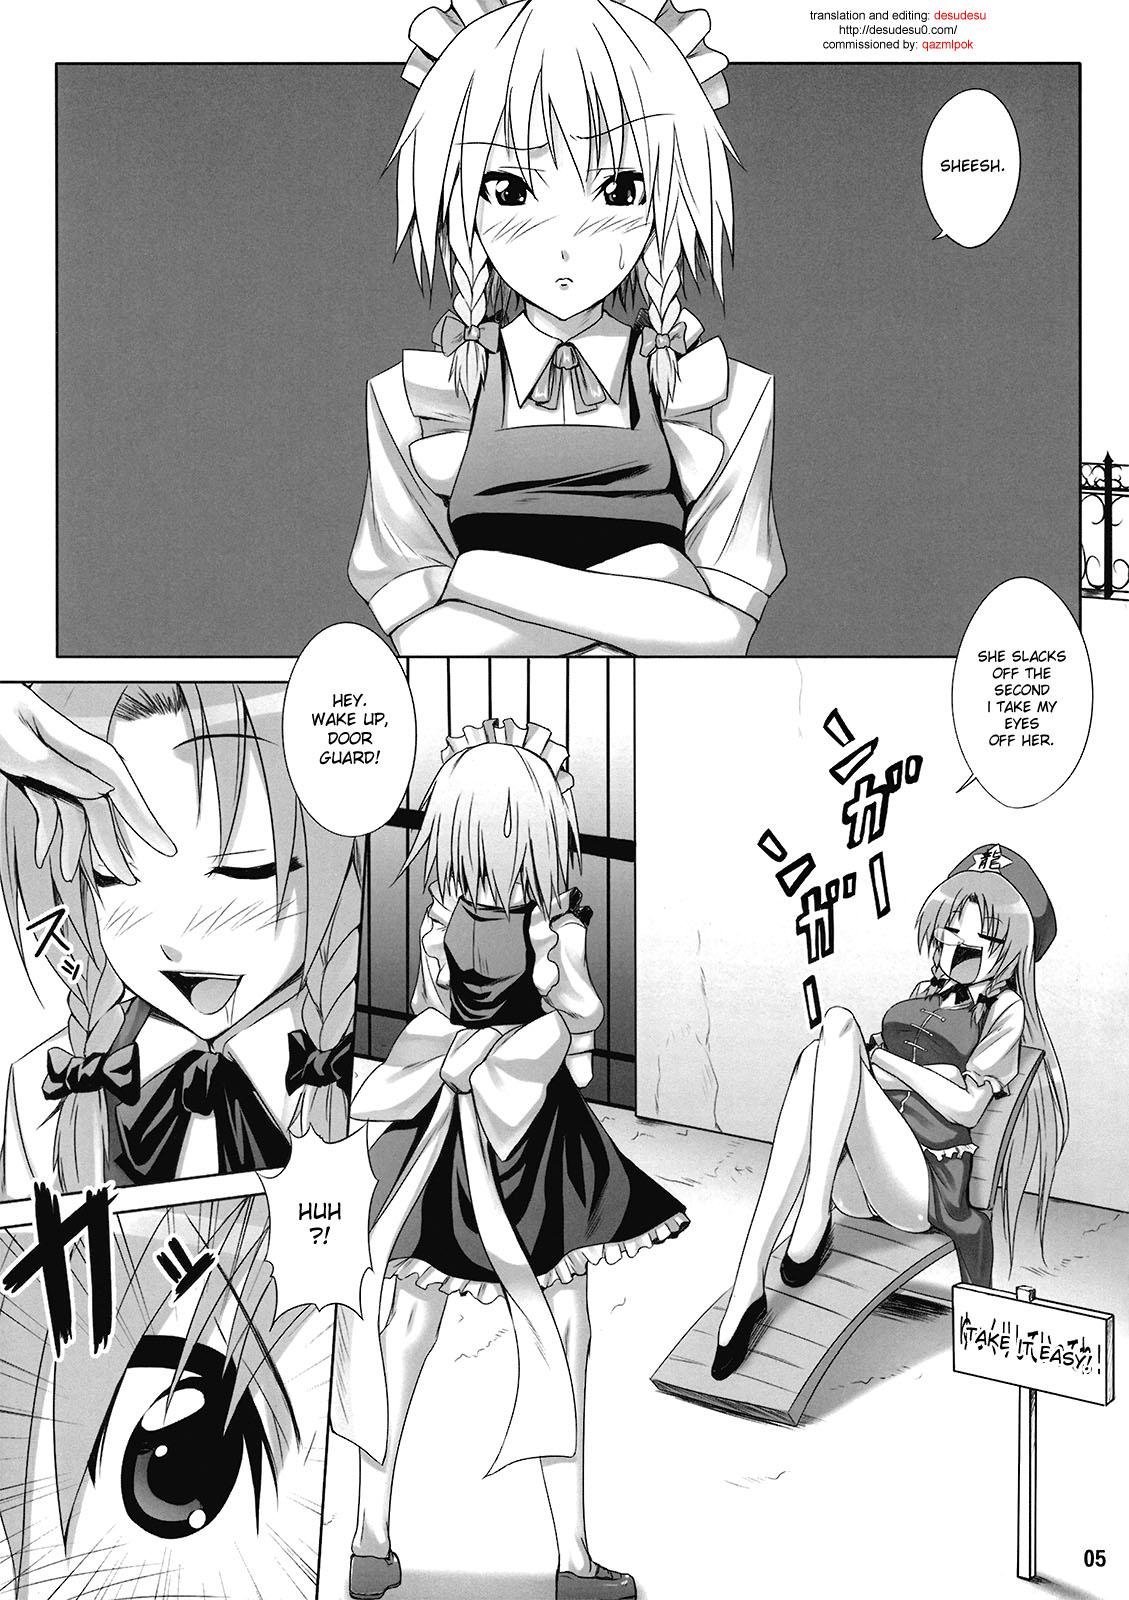 Petite Porn Maid in China - Touhou project Naked Sex - Page 5